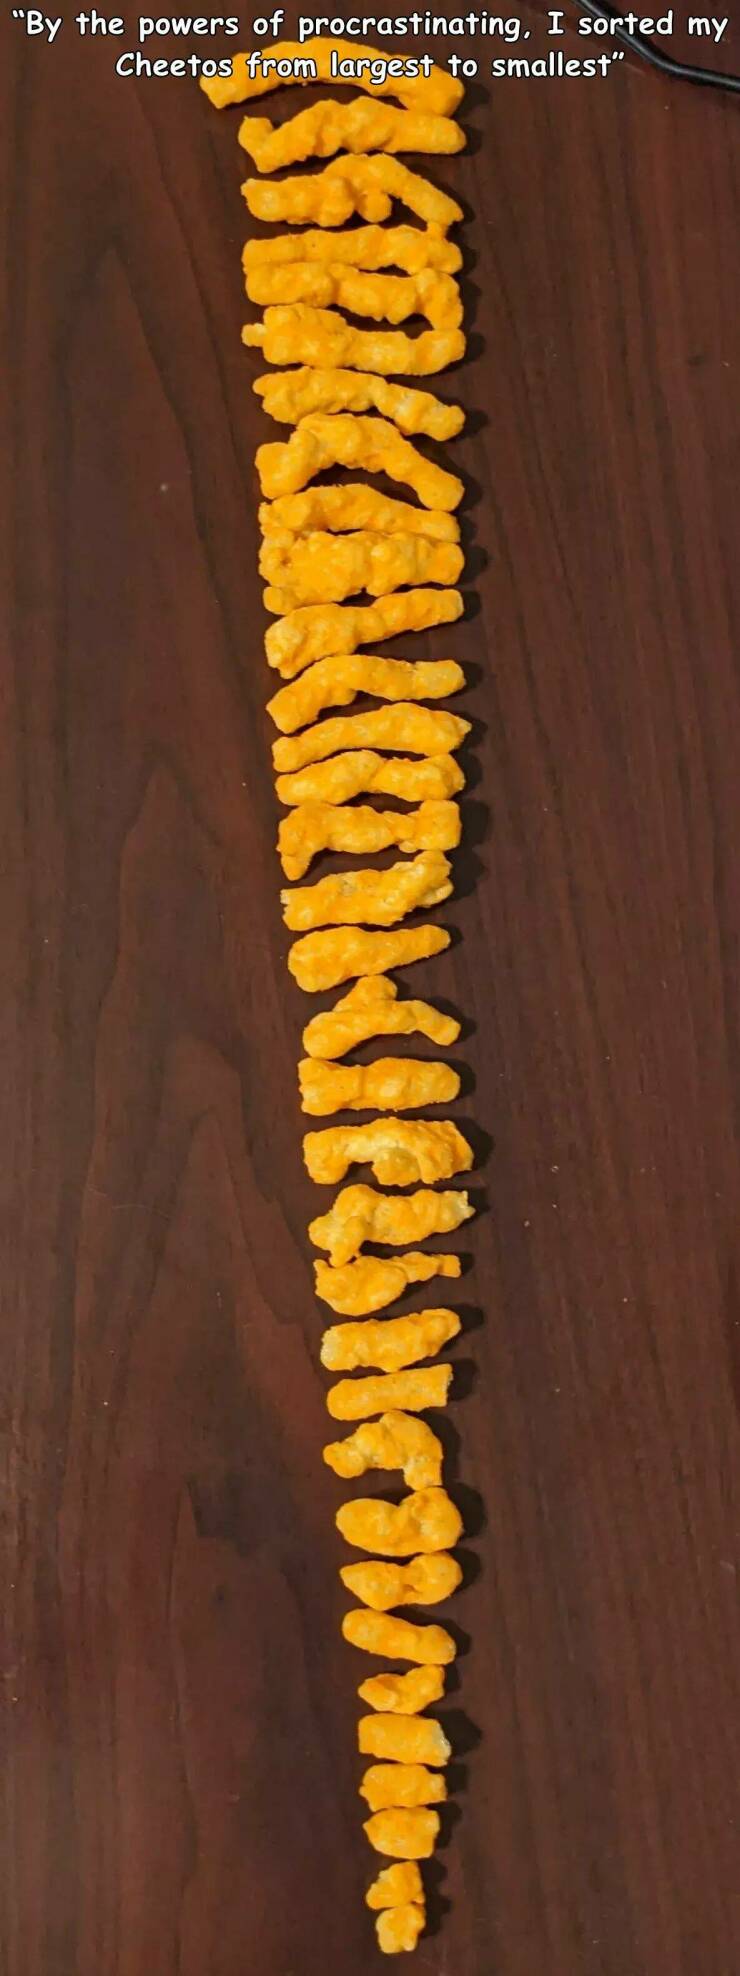 cool random pics for your daily dose - orange - "By the powers of procrastinating, I sorted my Cheetos from largest to smallest" Mencilencieusem